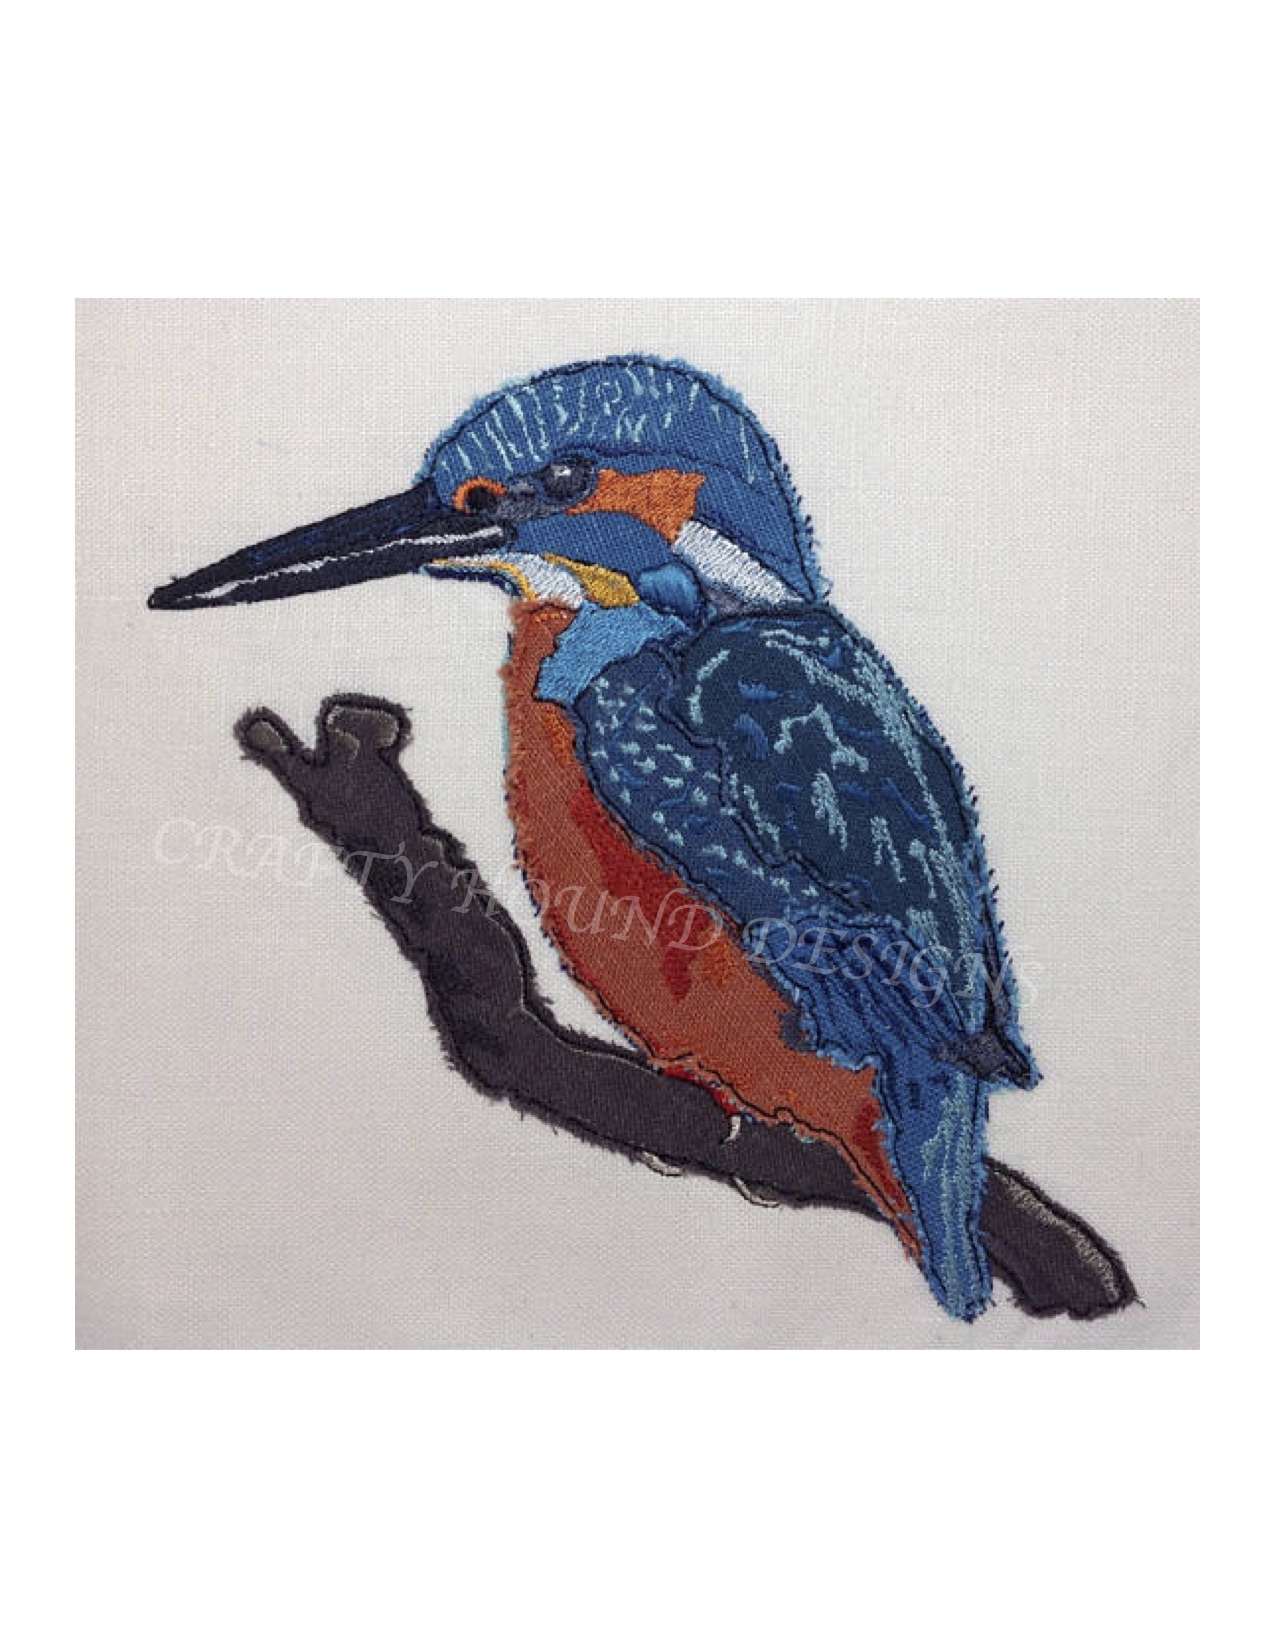 Helen, KINGFISHER - designed and stitched by myself using doggie bag pieces